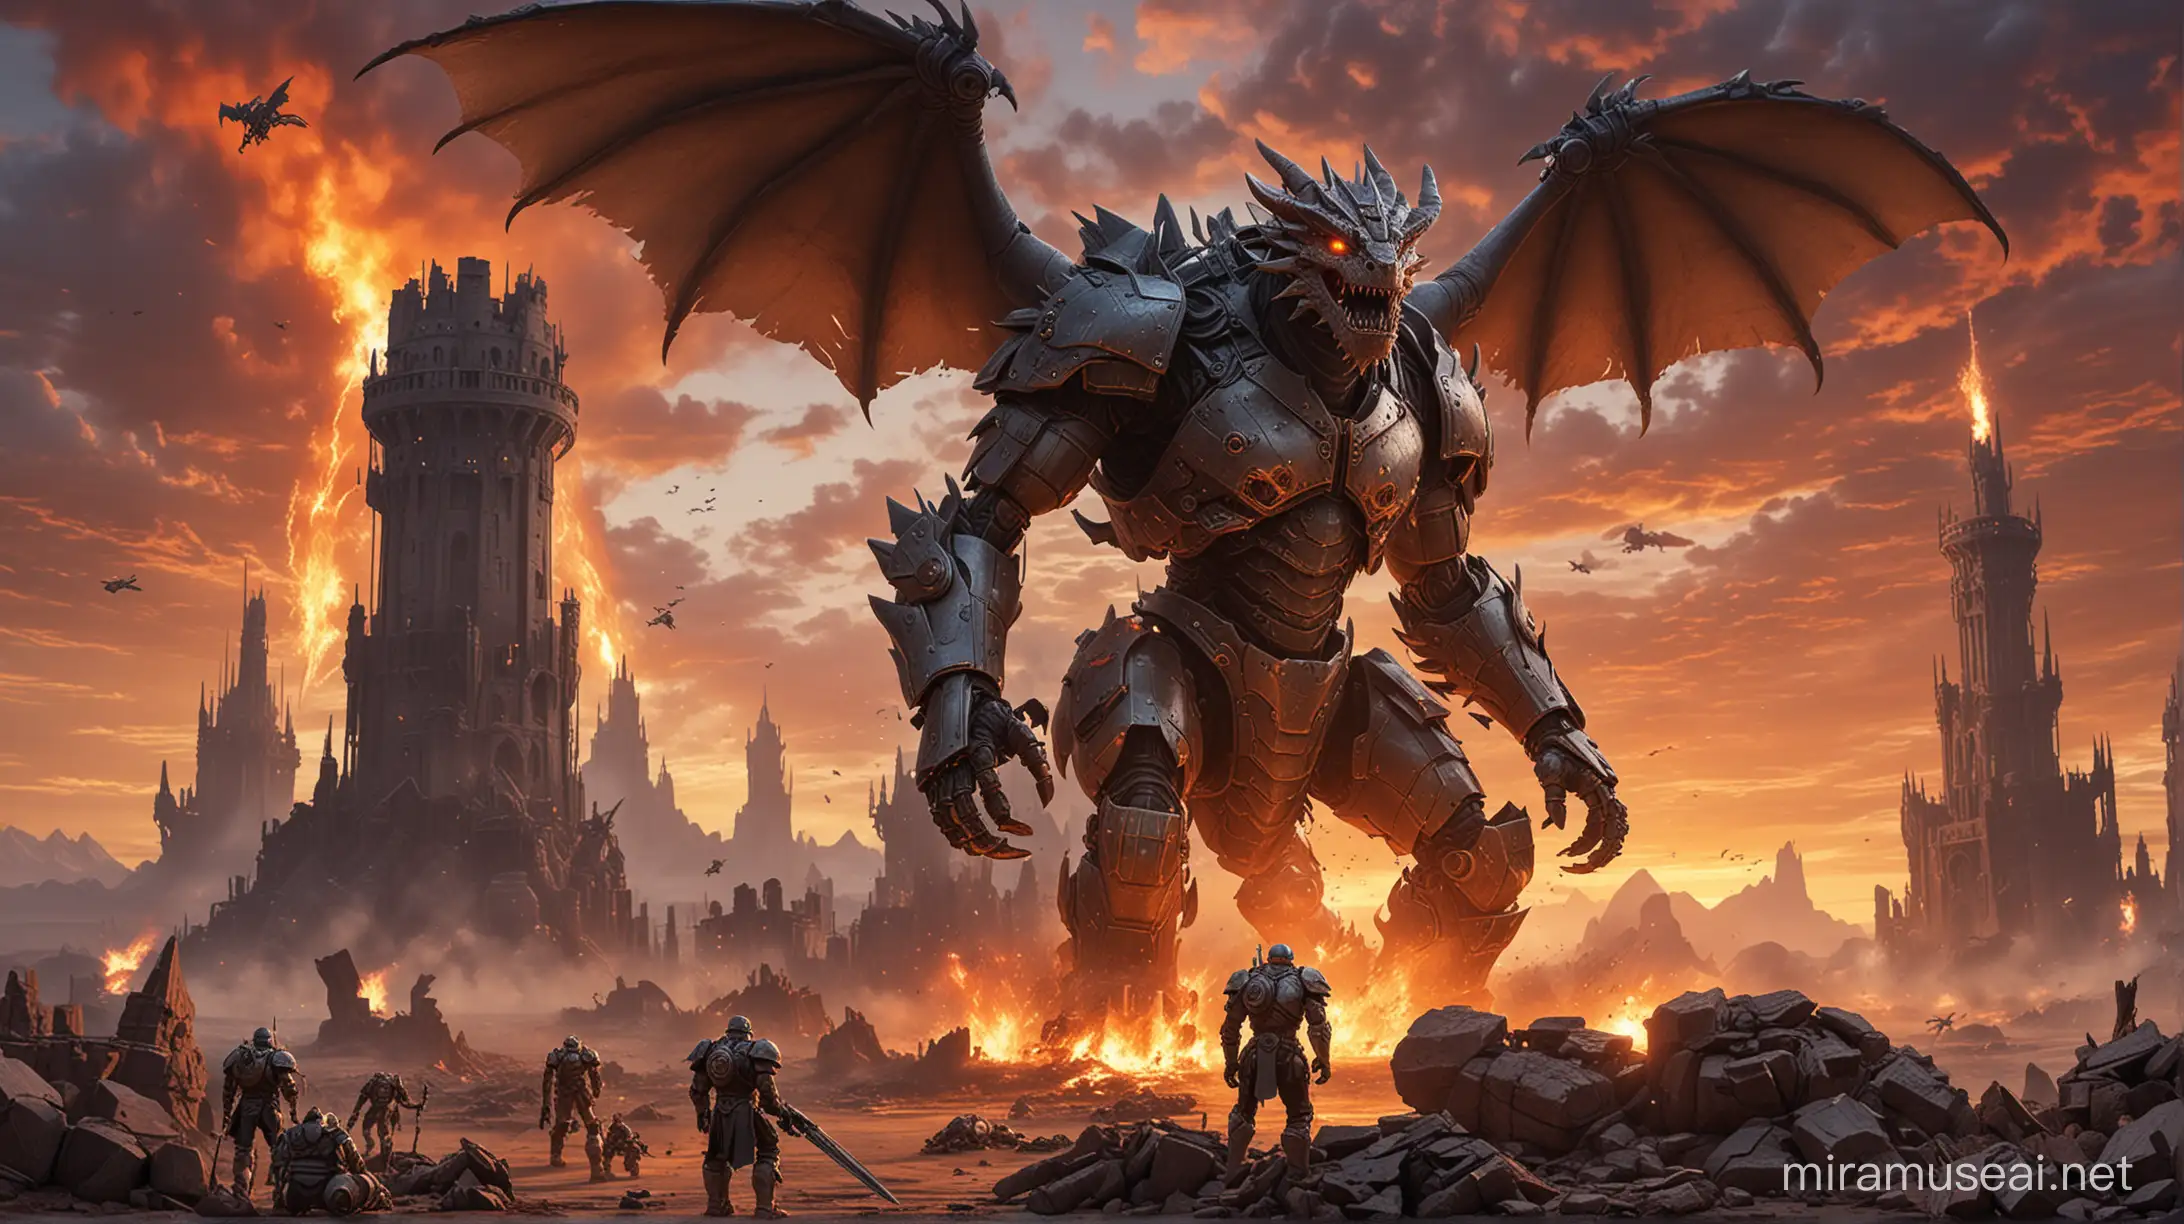 Mythical Creatures and Robots Clash in a Fiery Sky